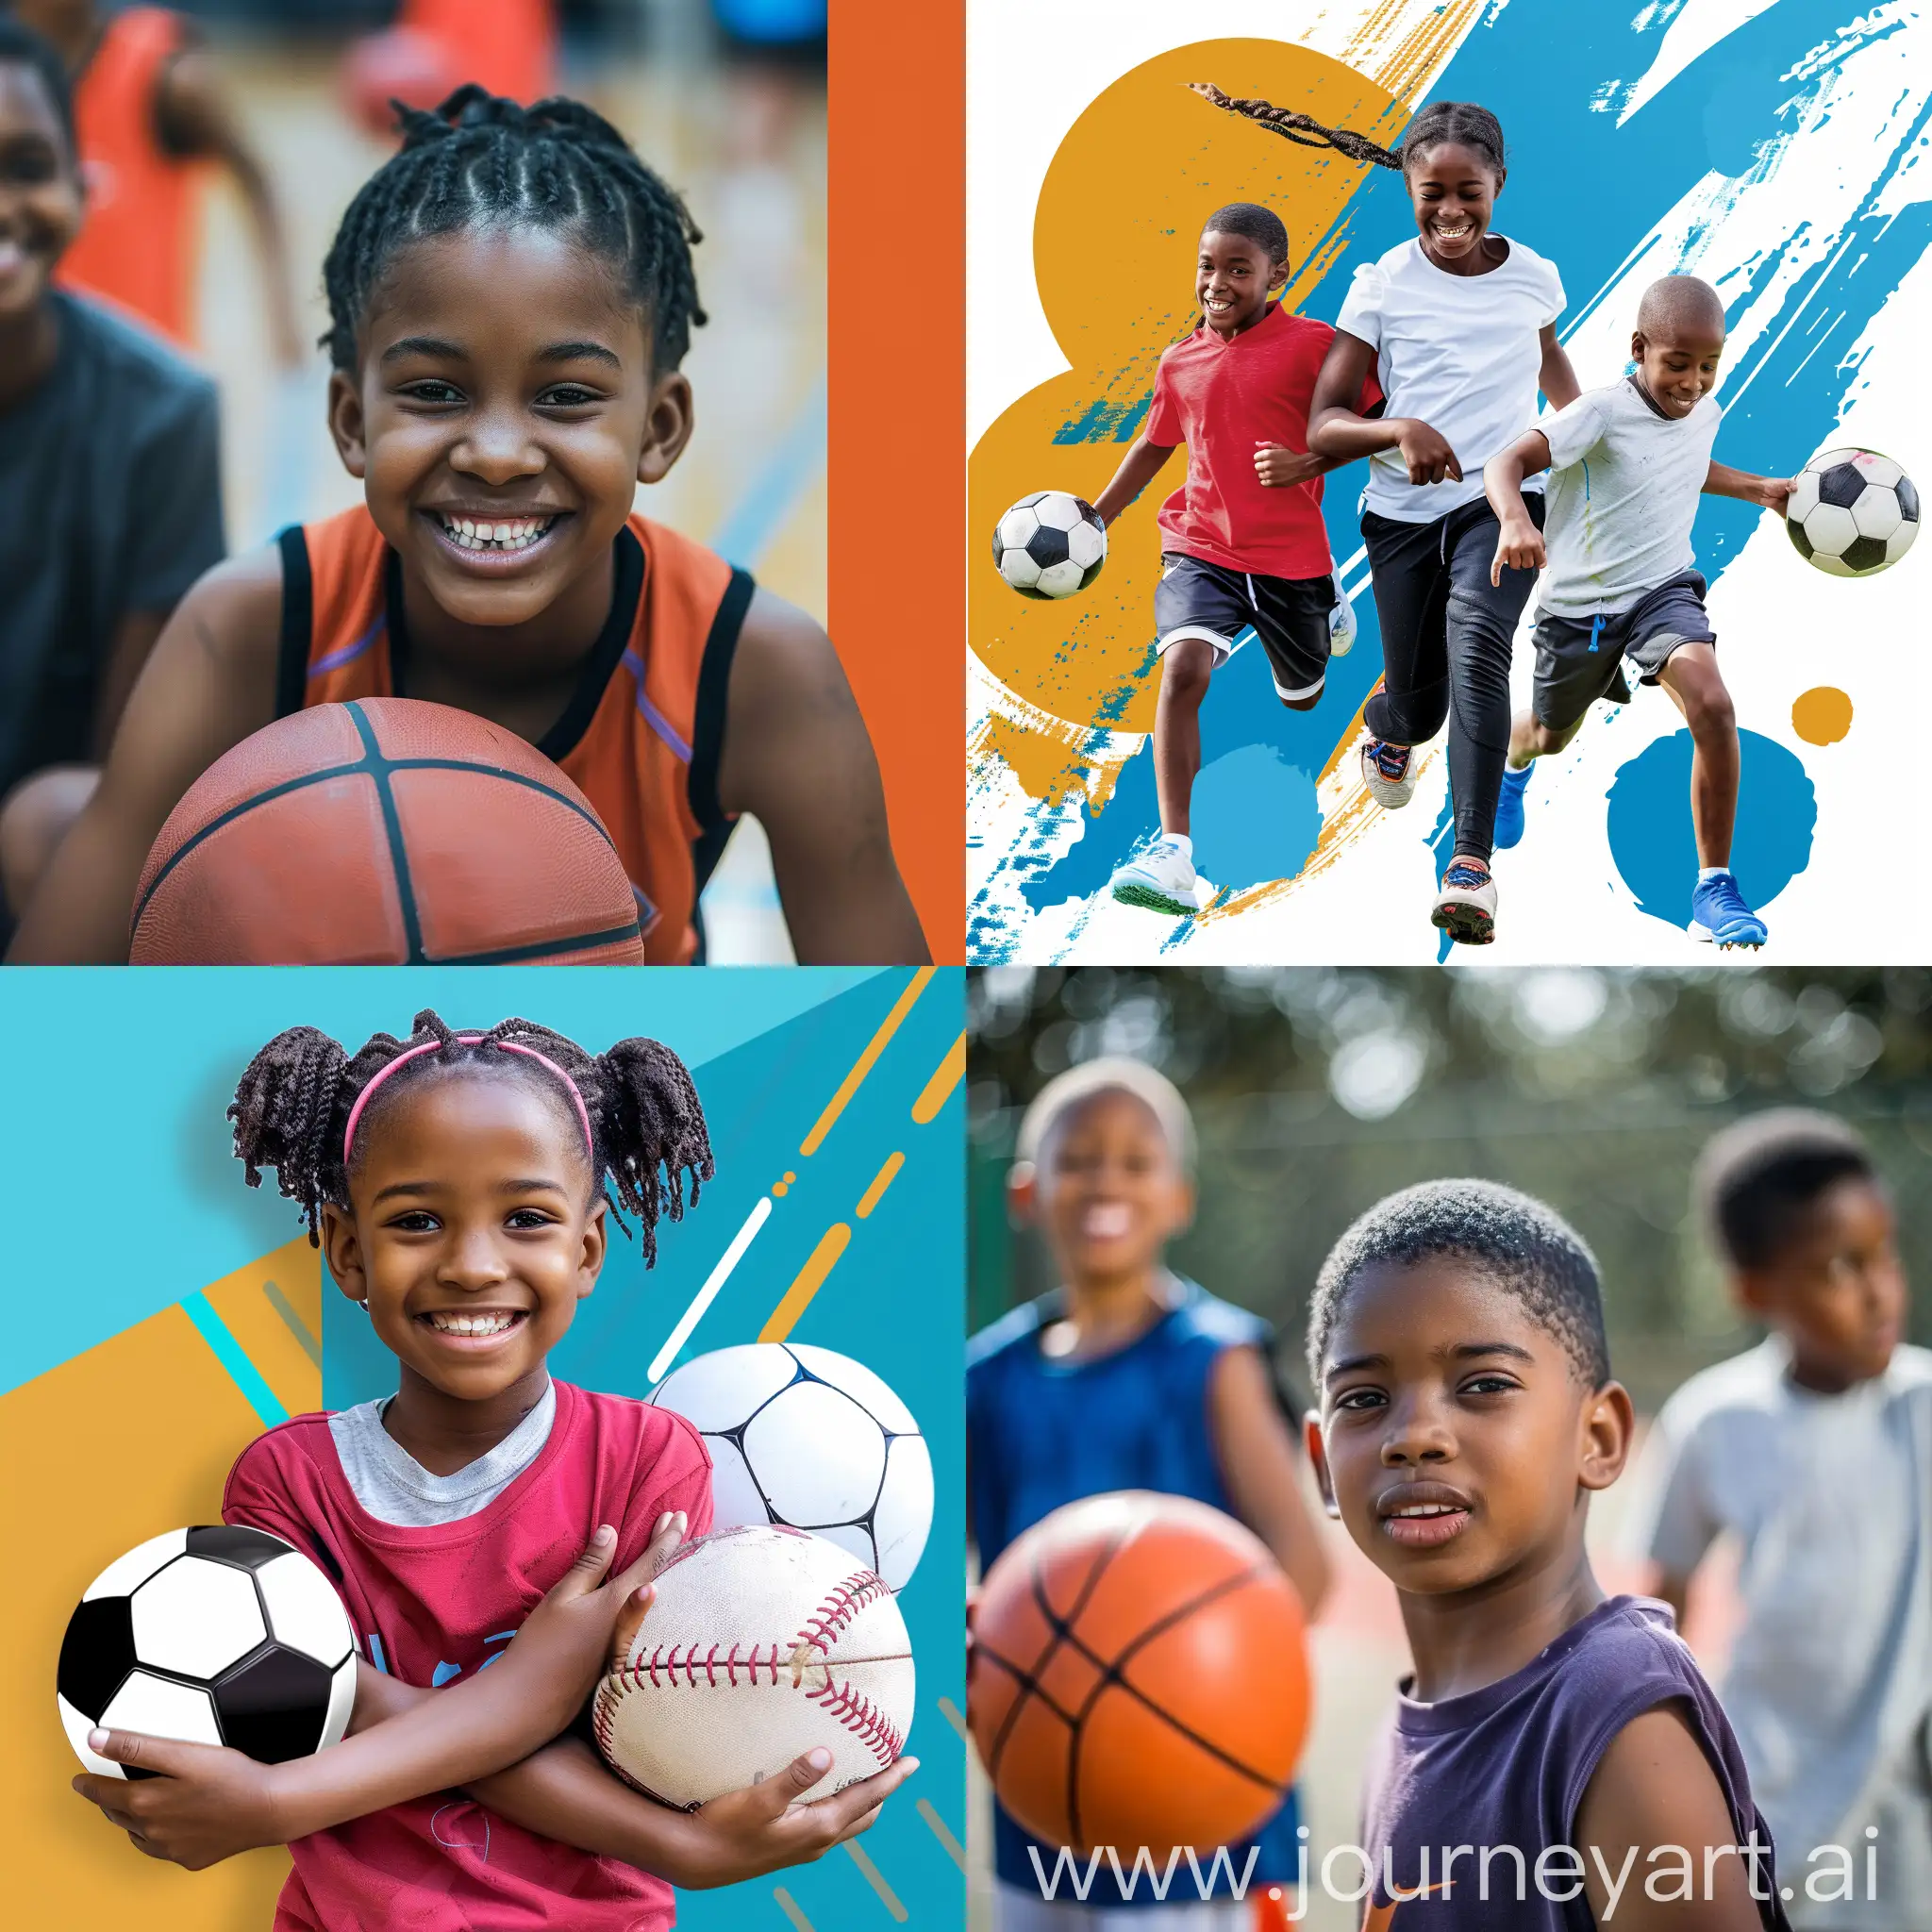 Create a flyer for Youth Sports Training for African American children
